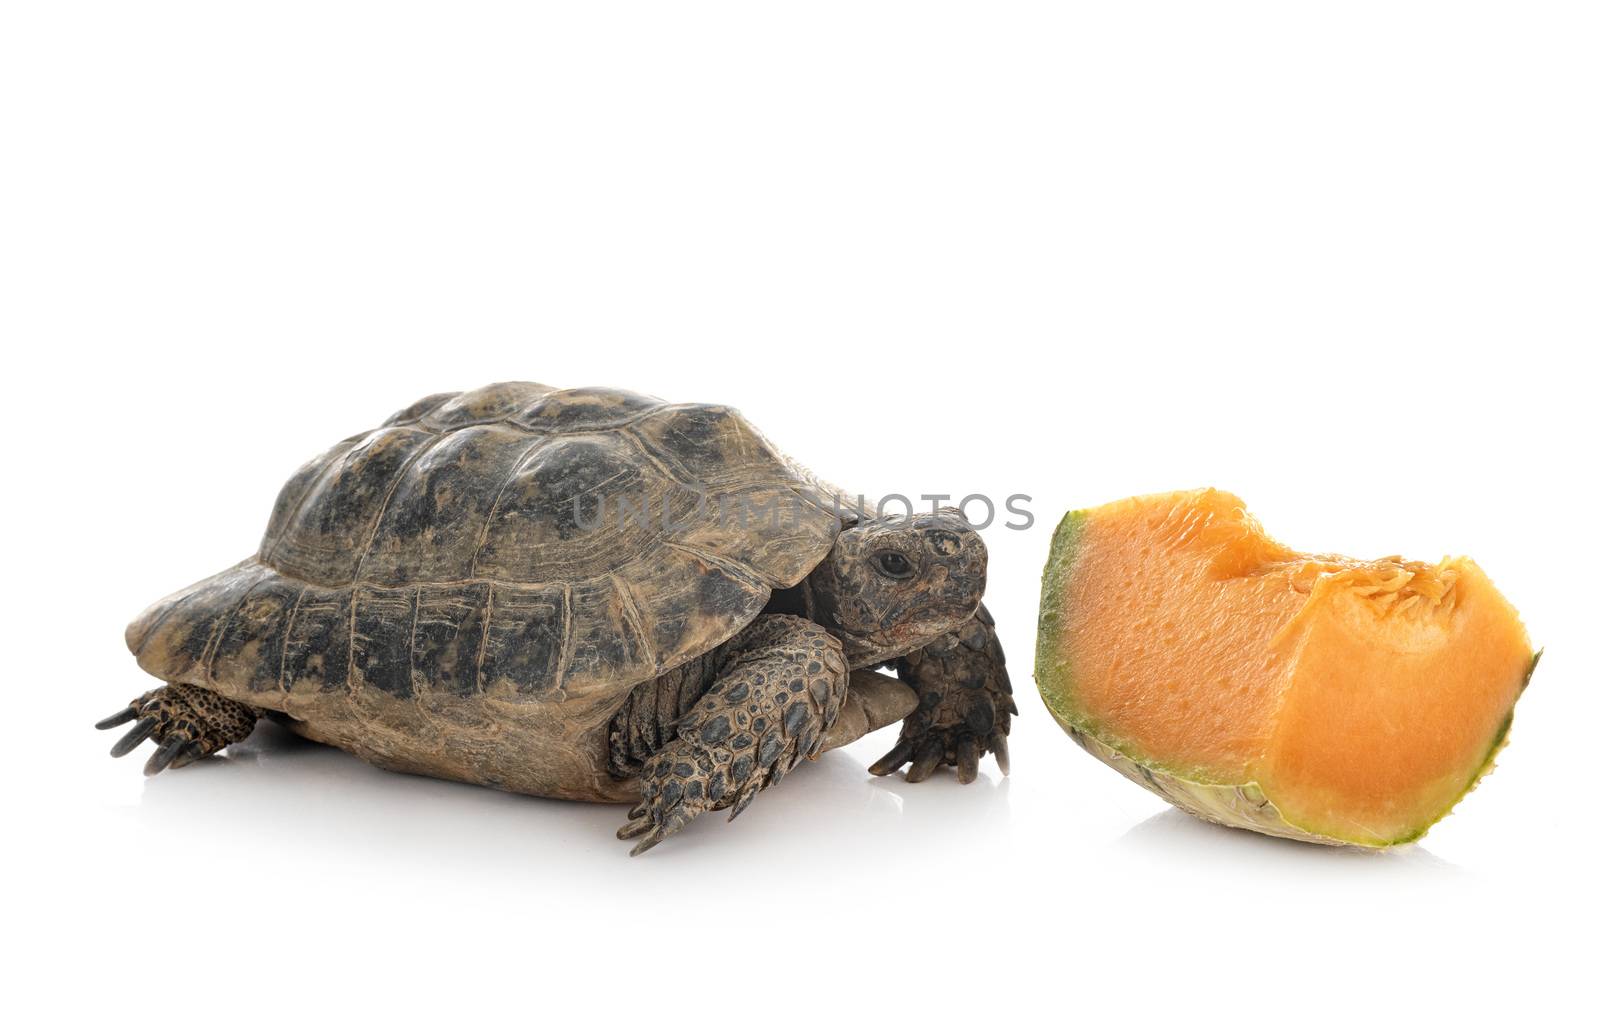 Greek tortoise in front of white background